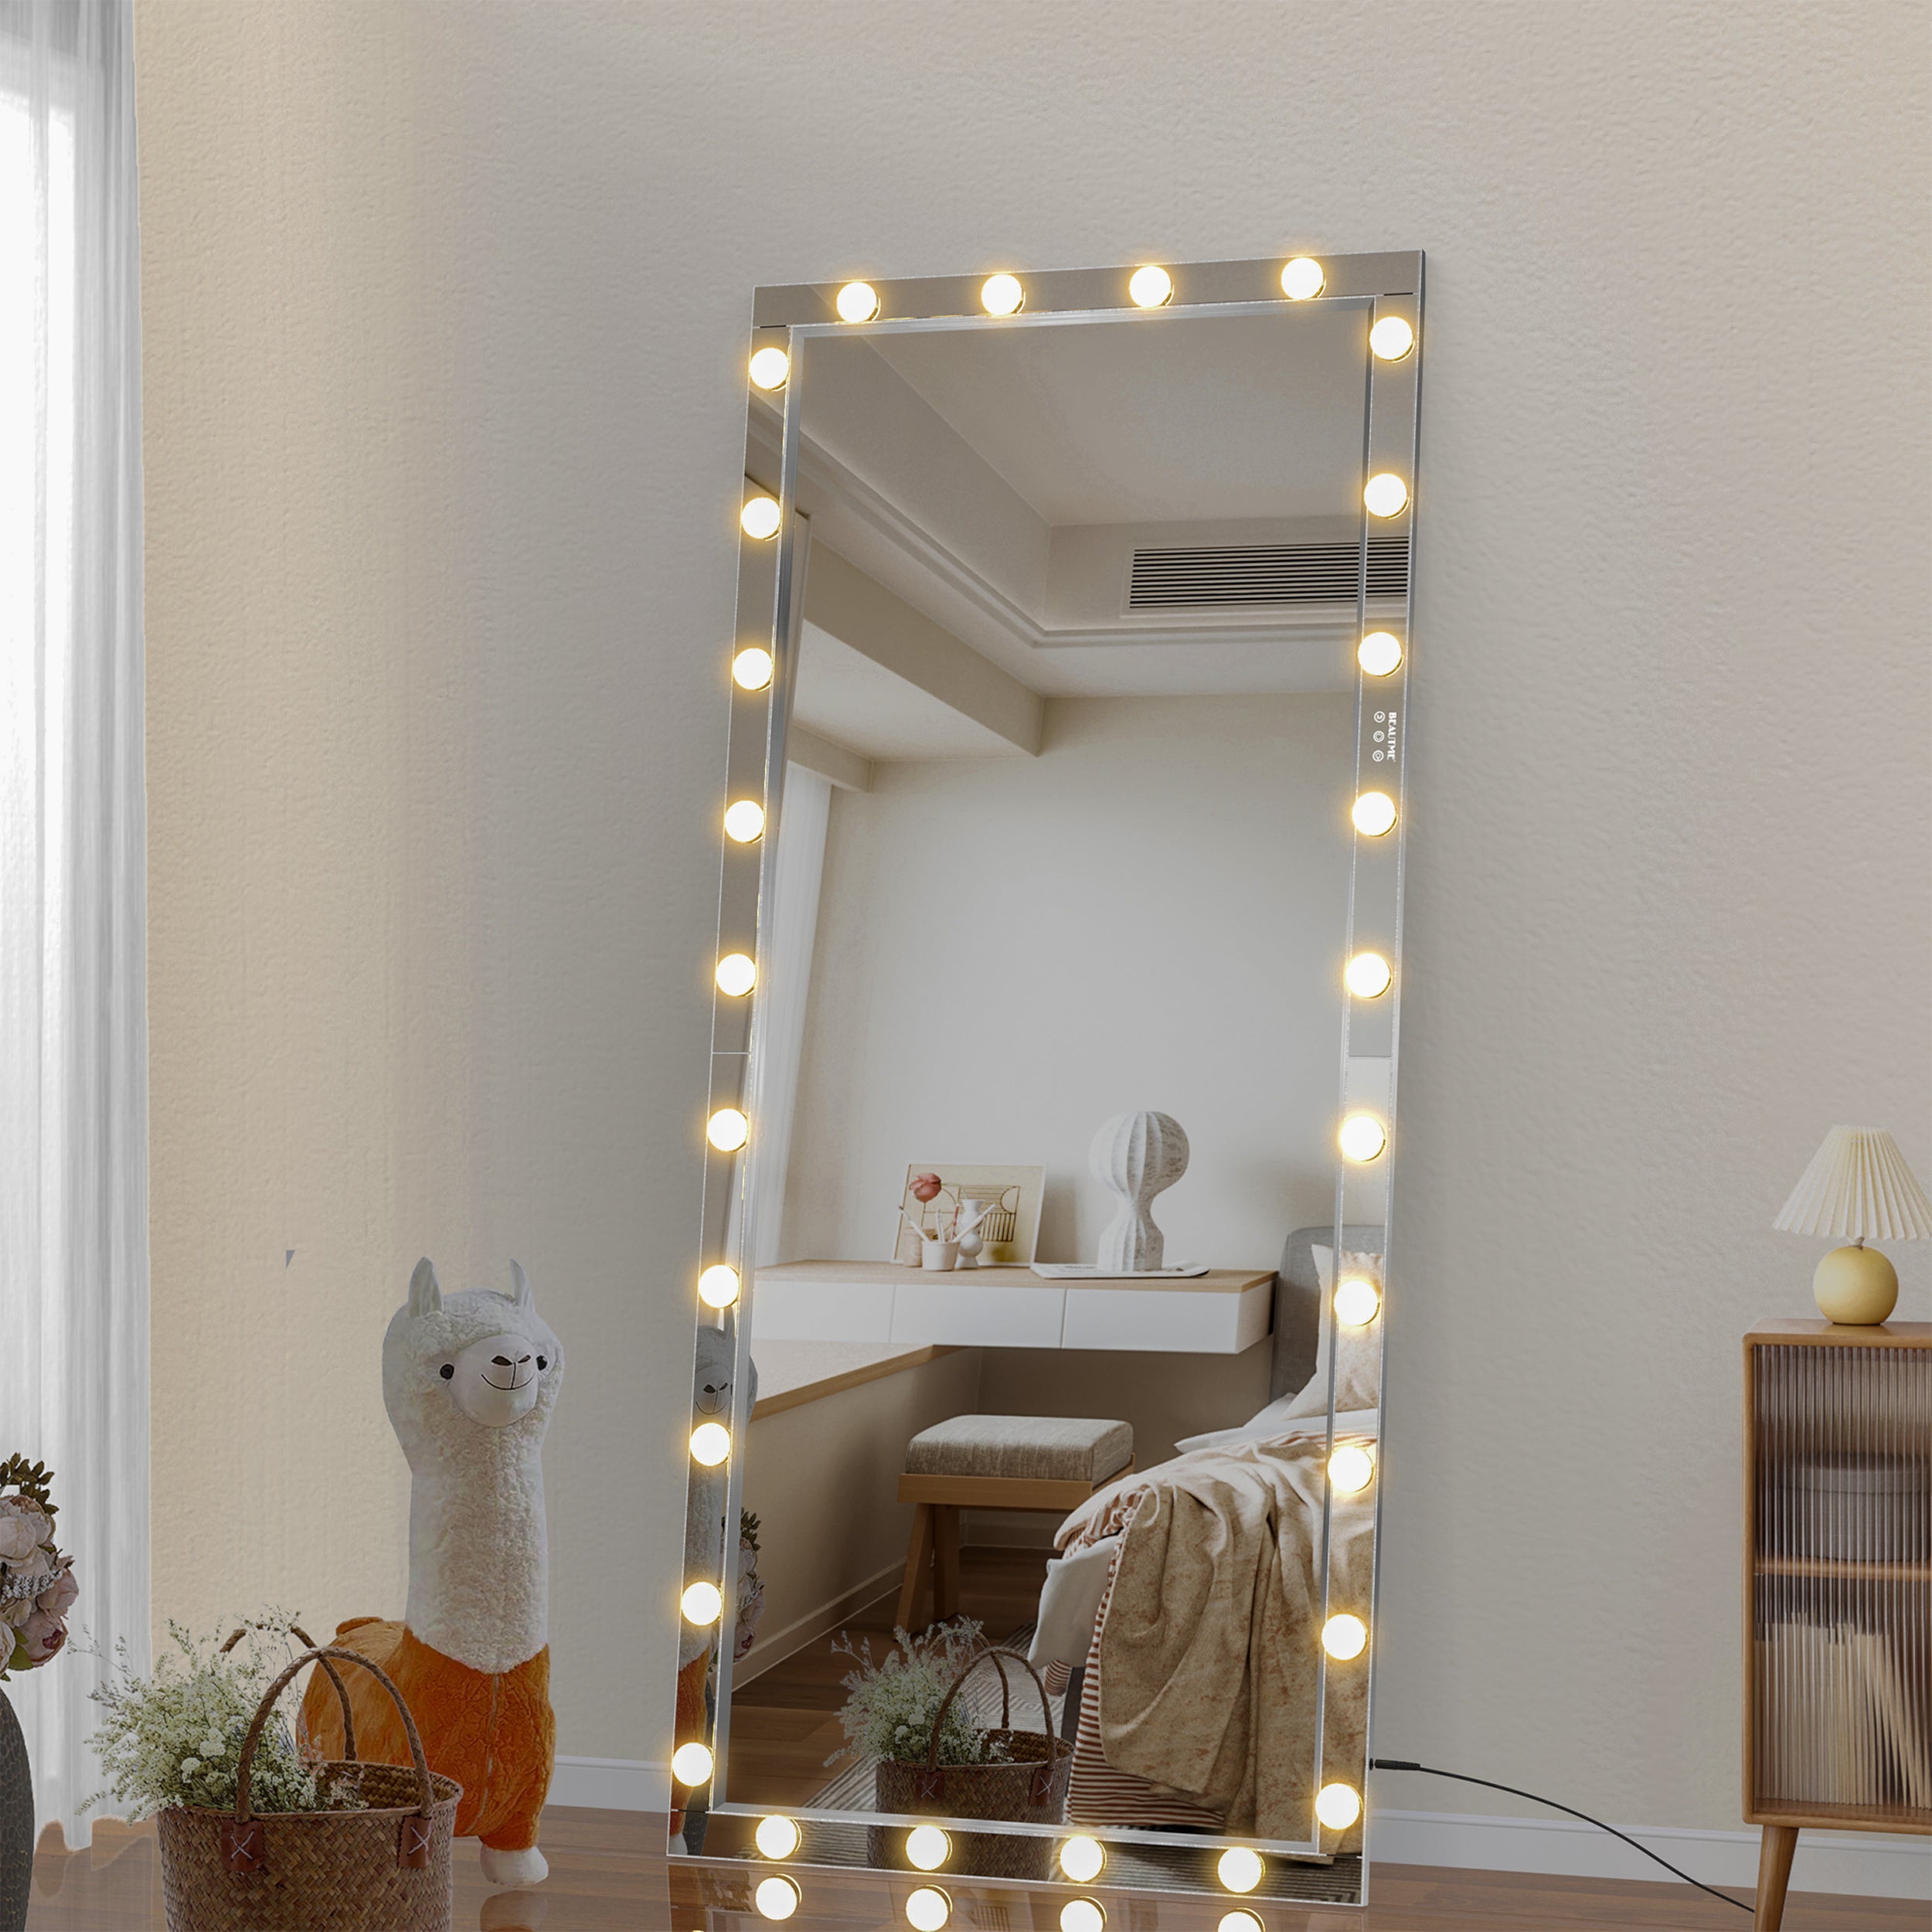 Hollywood LED Full Body Mirror with Lights Extra Large Full Length Vanity Mirror with 3 Color Mode Lights, Vertical Horizontal Hanging Aluminum Framed Mirror, 72 x 36 Inch, Silver